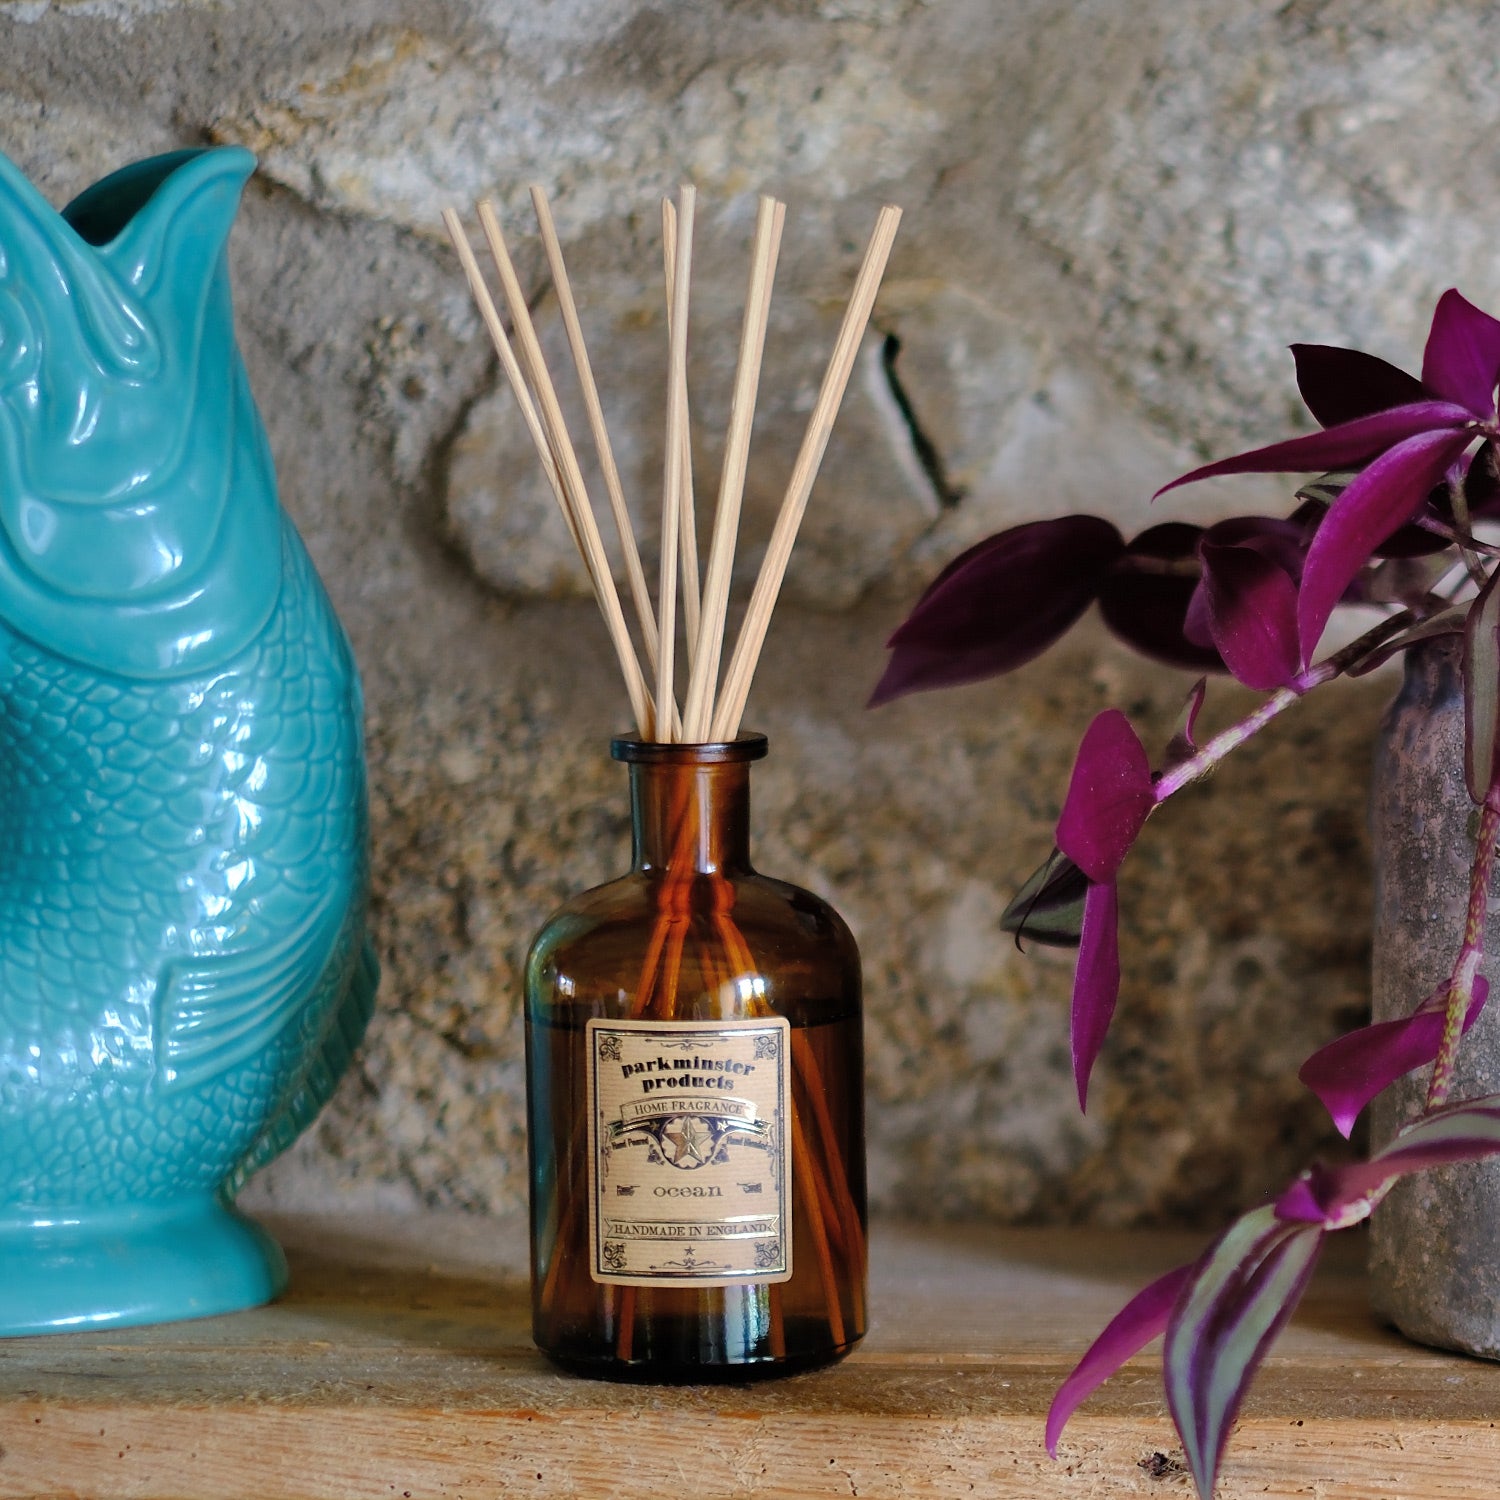 Experience the refreshing scent of the Ocean with our Amber Glass Apothecary Collection 200ml Reed Diffusers by Parkminster Home Fragrance Co (Cornwall). Like a walk across a windy beach, these diffusers bring a crisp, invigorating fragrance to your home.